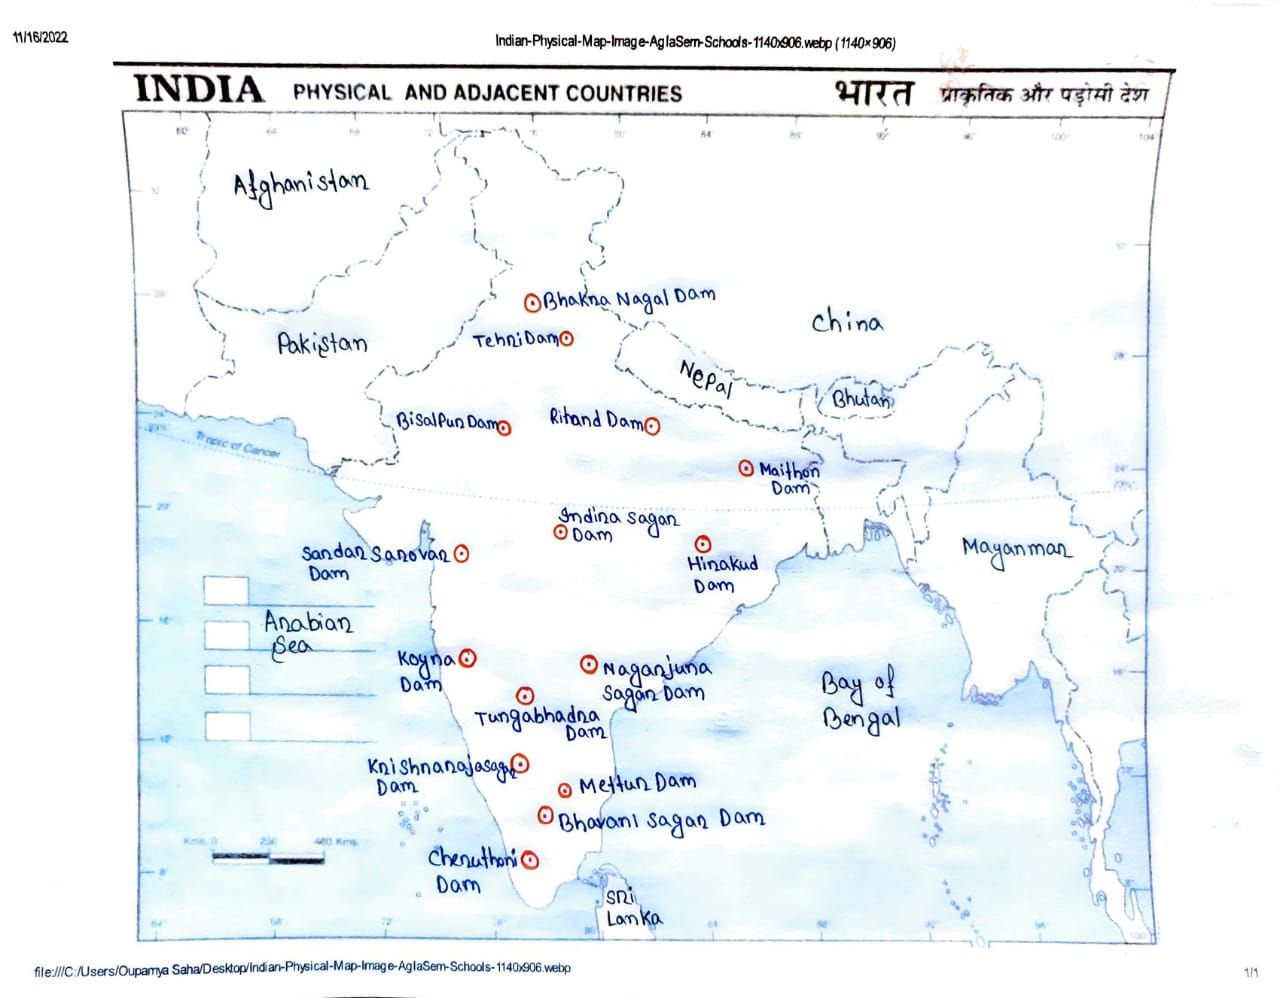 Major Dams in India in a Map